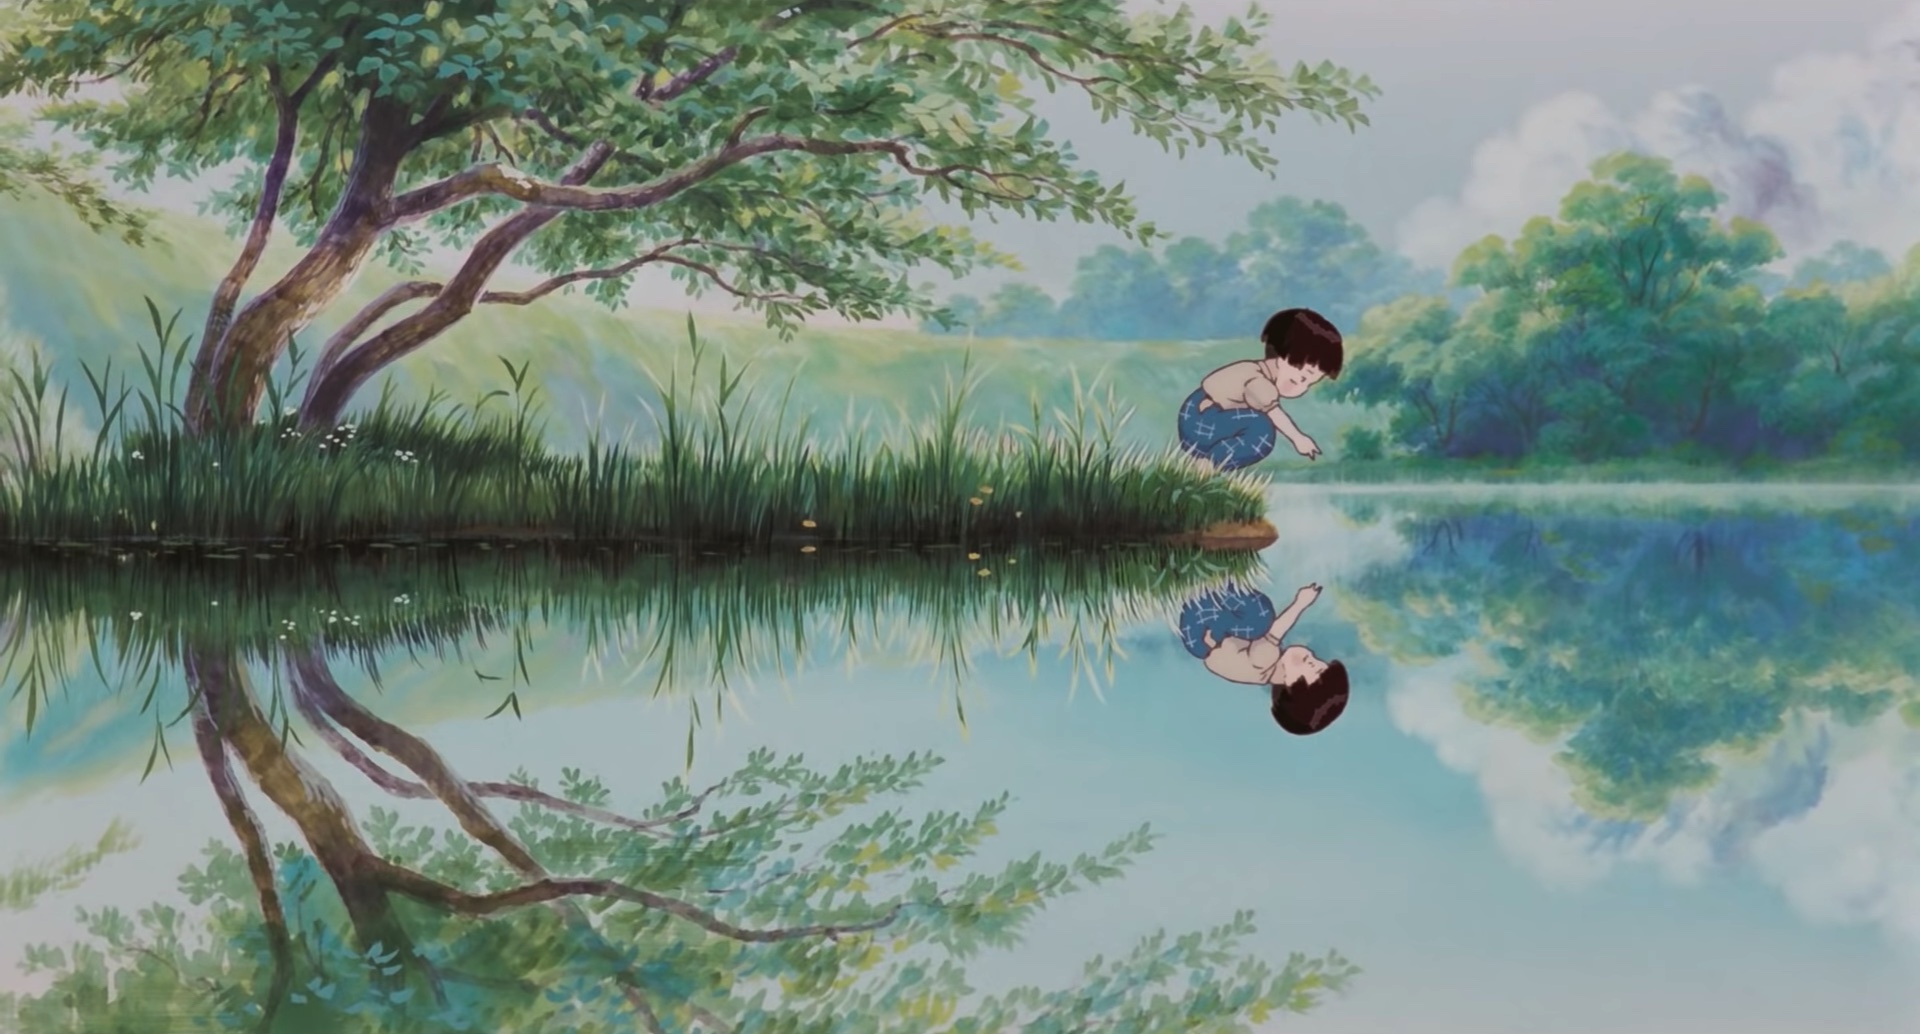 Seven Things I Learned While Writing A Book On Studio Ghibli's 'Grave Of  The Fireflies